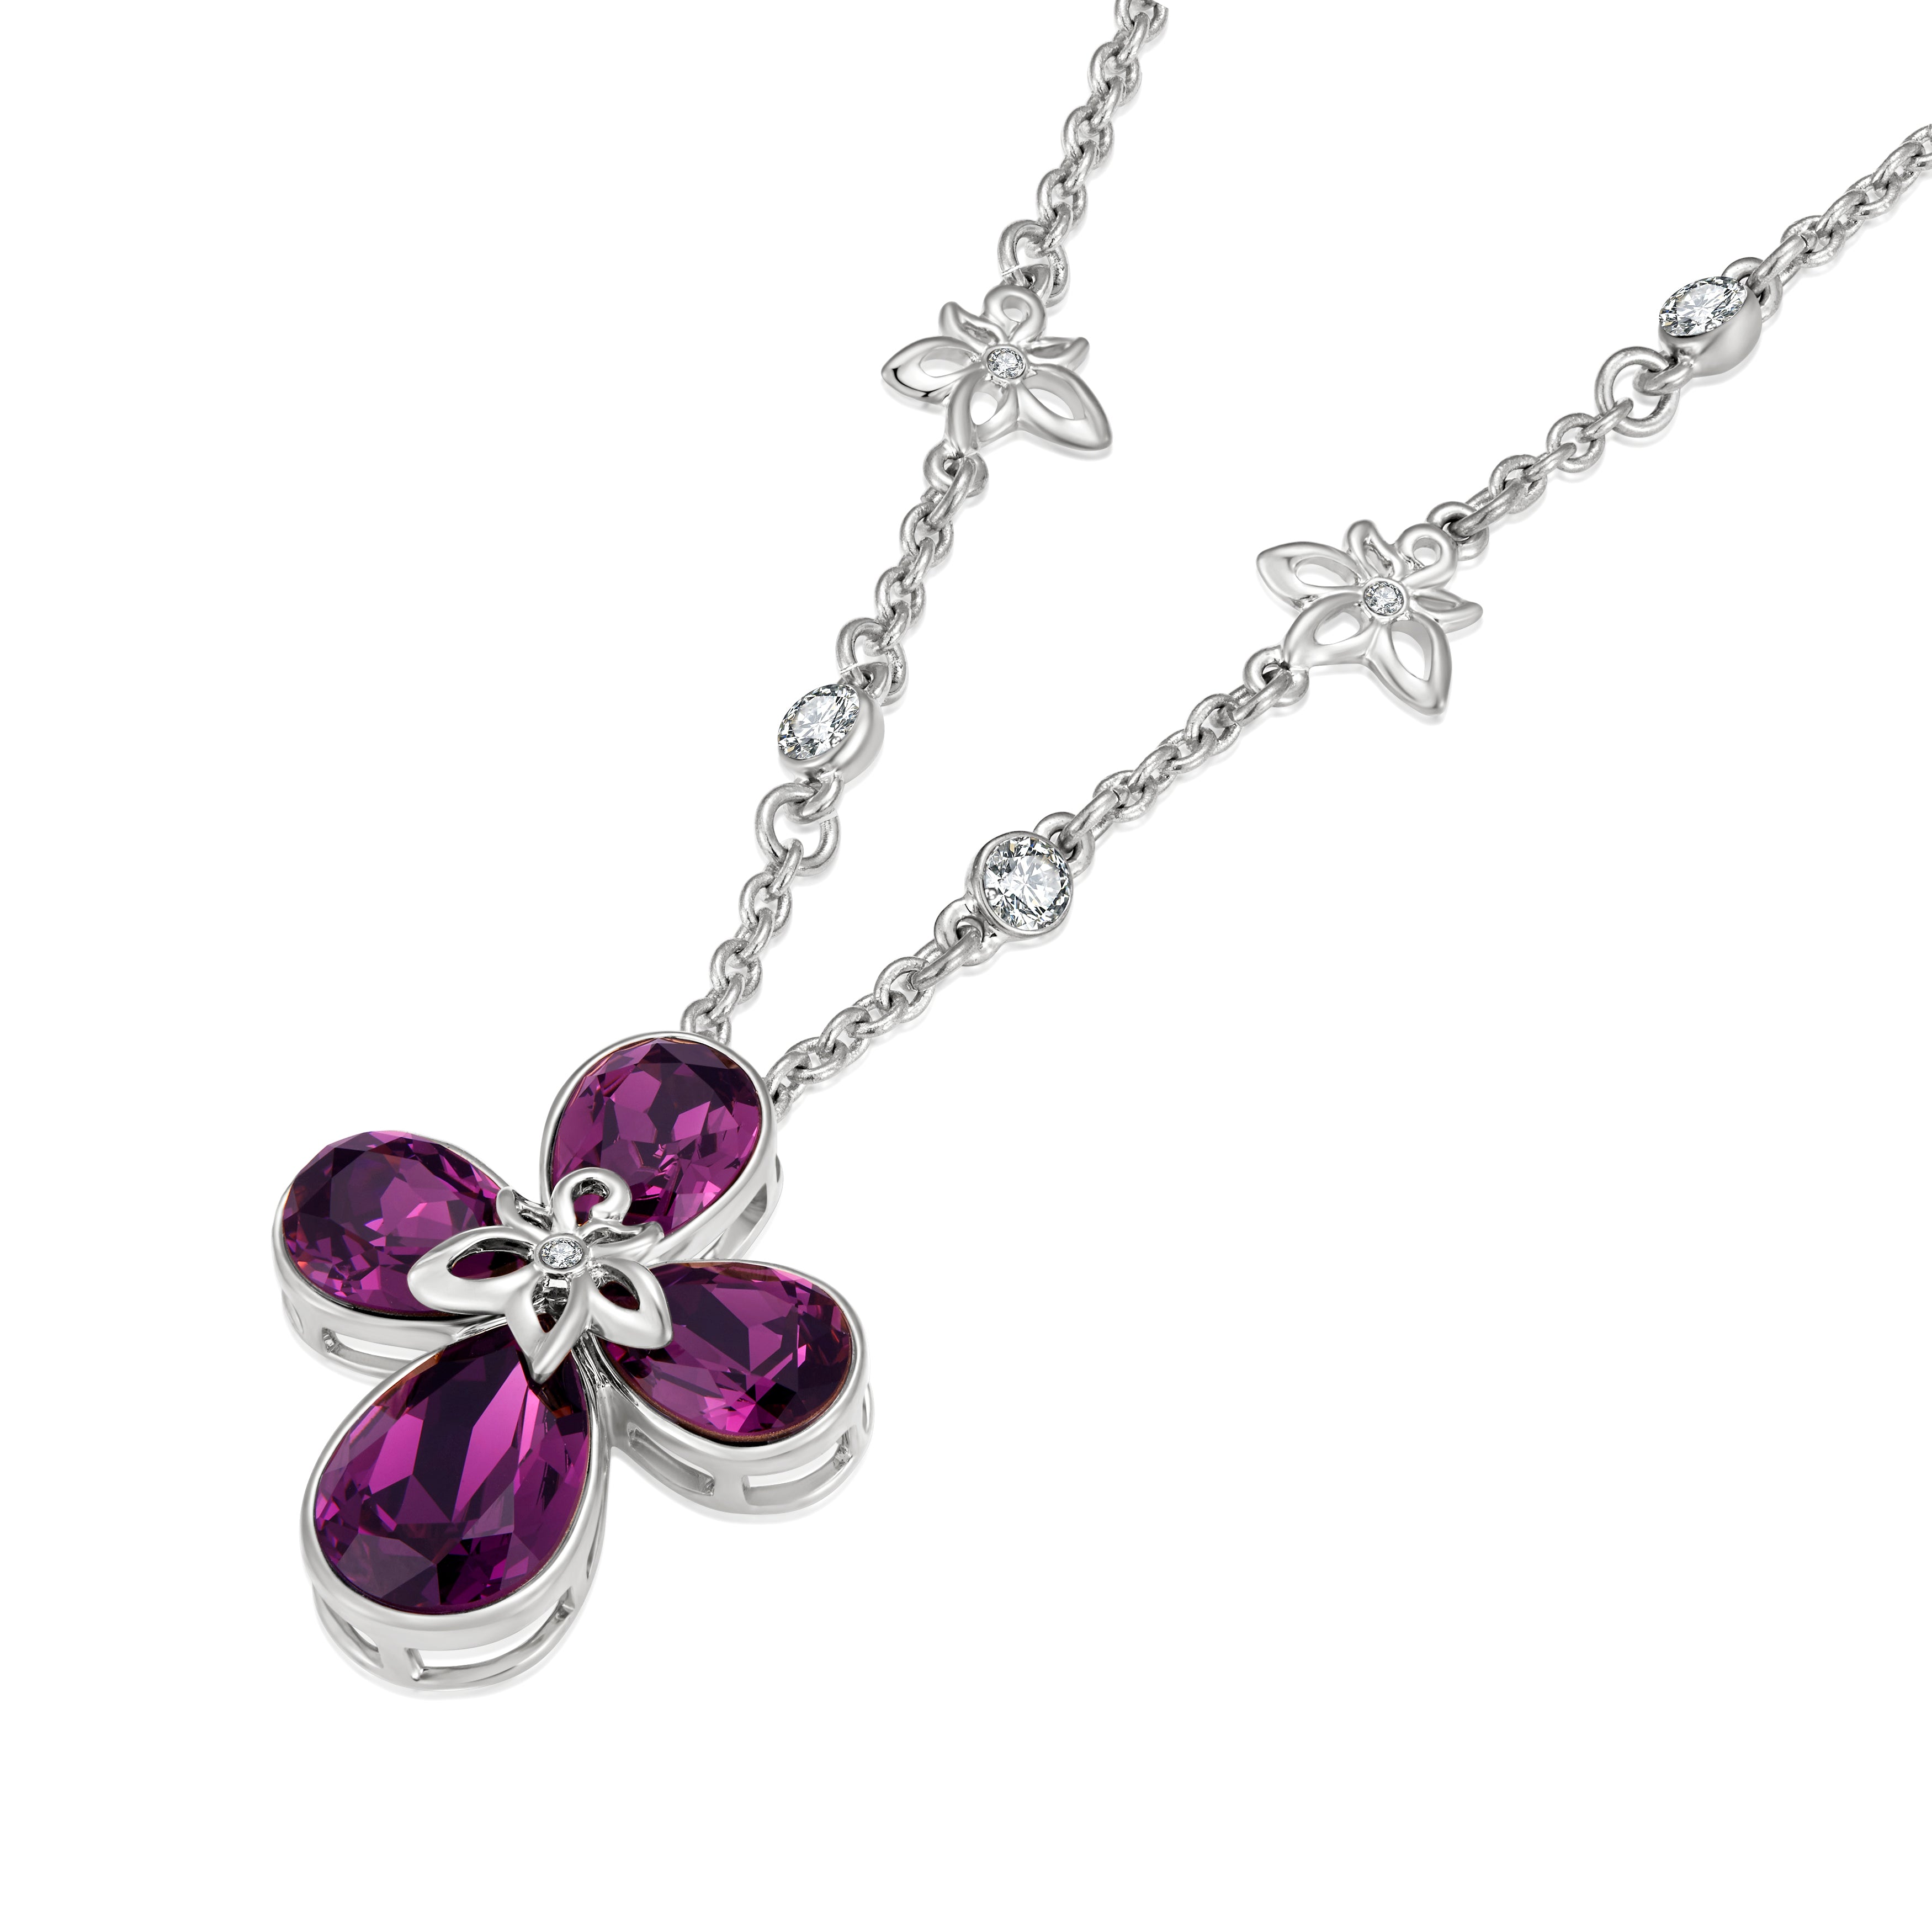 VICACCI White gold Four Leaf Clover Necklace，Embellished with crystals from Swarovski ; Lucky purple crystals